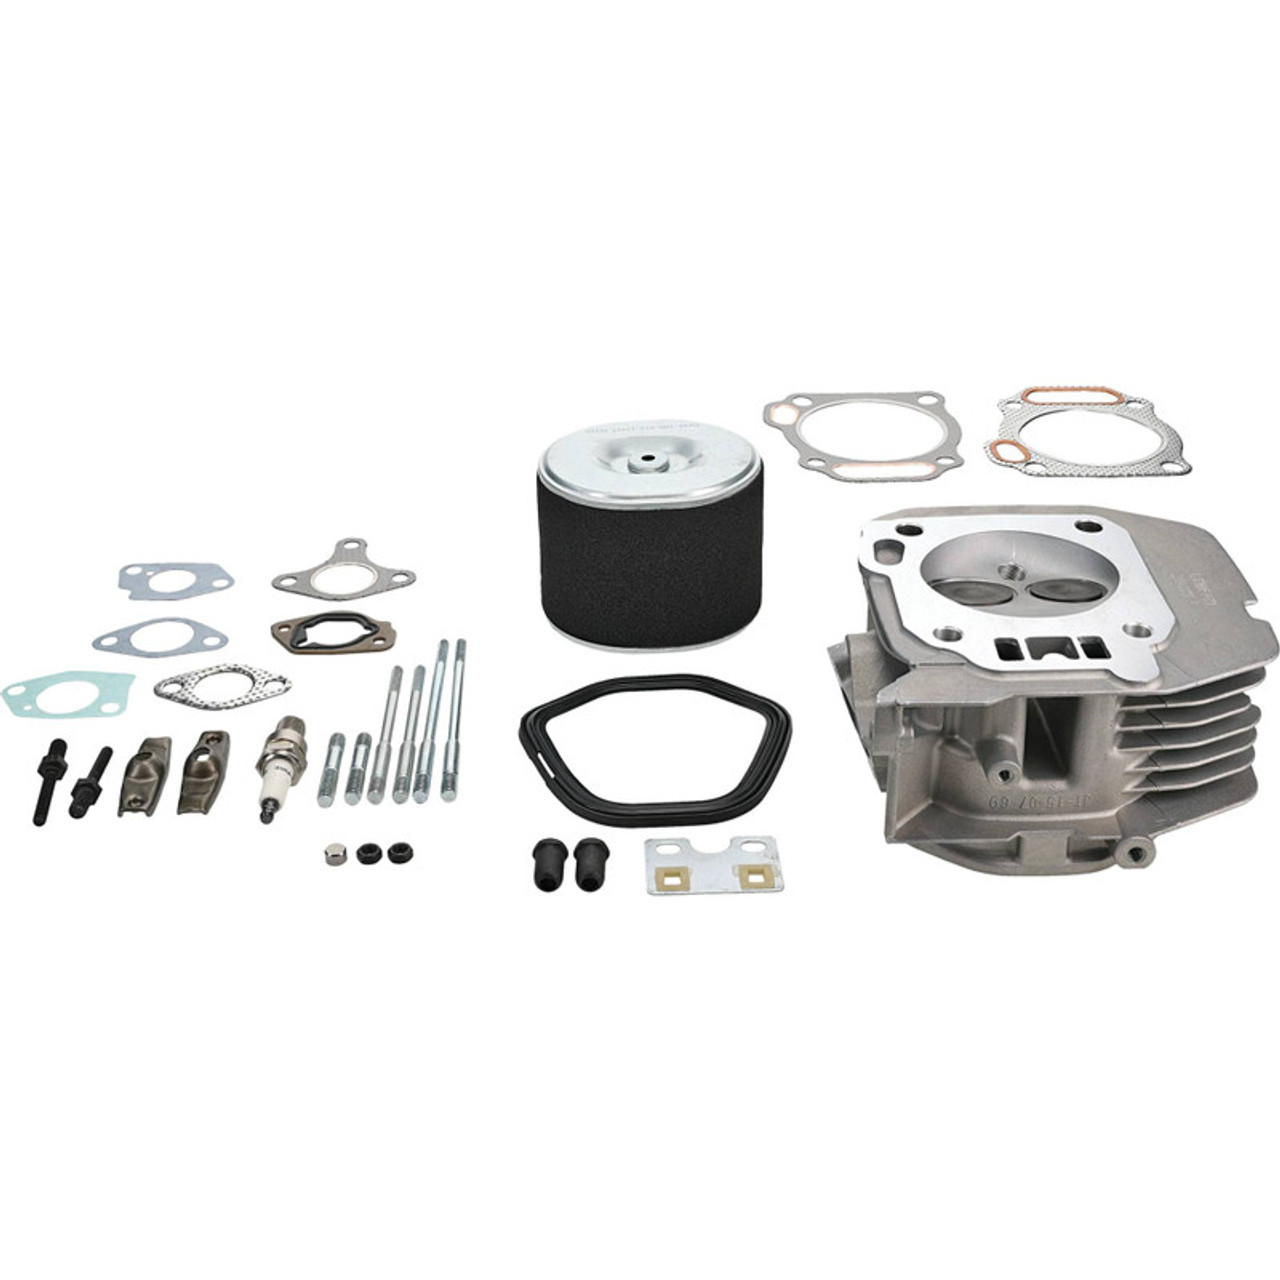 Stens 515-792 Cylinder Head Service Kit - (Replaces Honda 12200-ZF6-406, 12200-ZF6-W01)